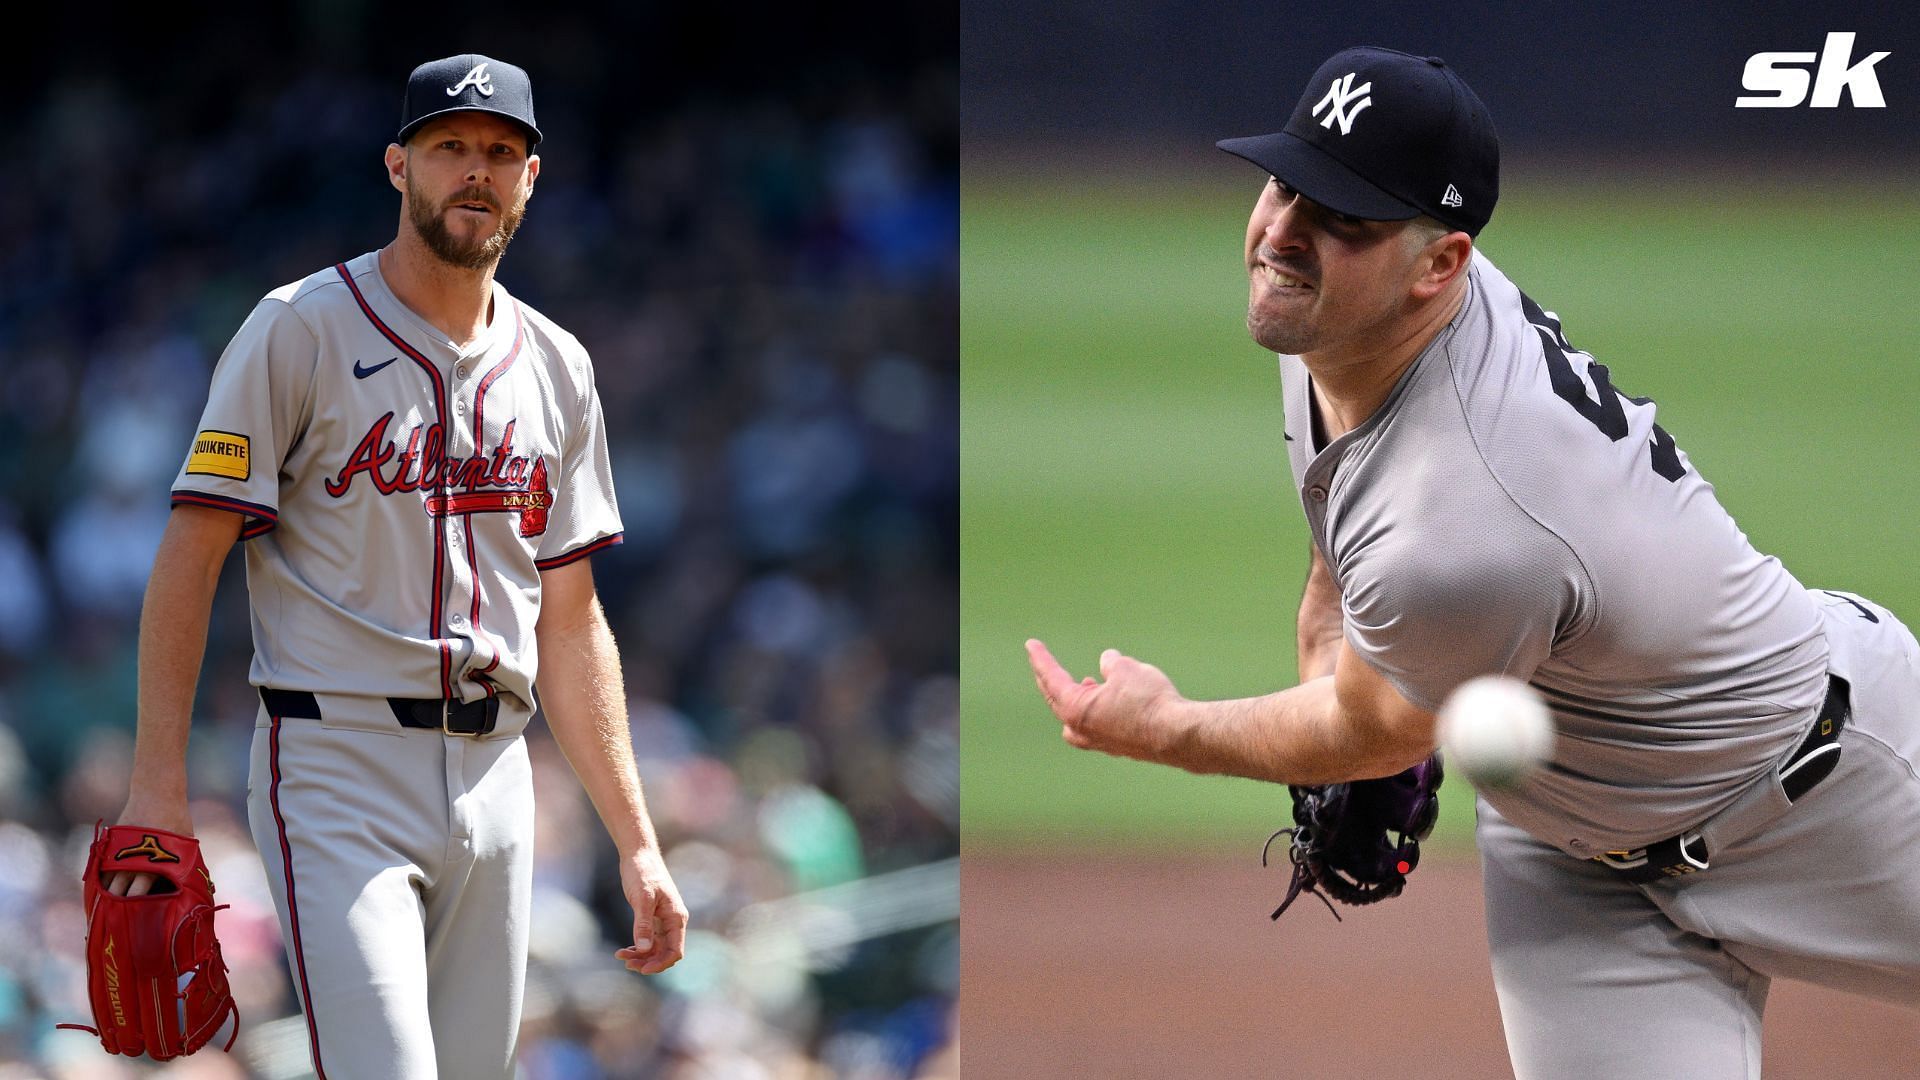 Carlos Rodon and Chris Sale will be among the pitchers appearing in MLB games on Friday